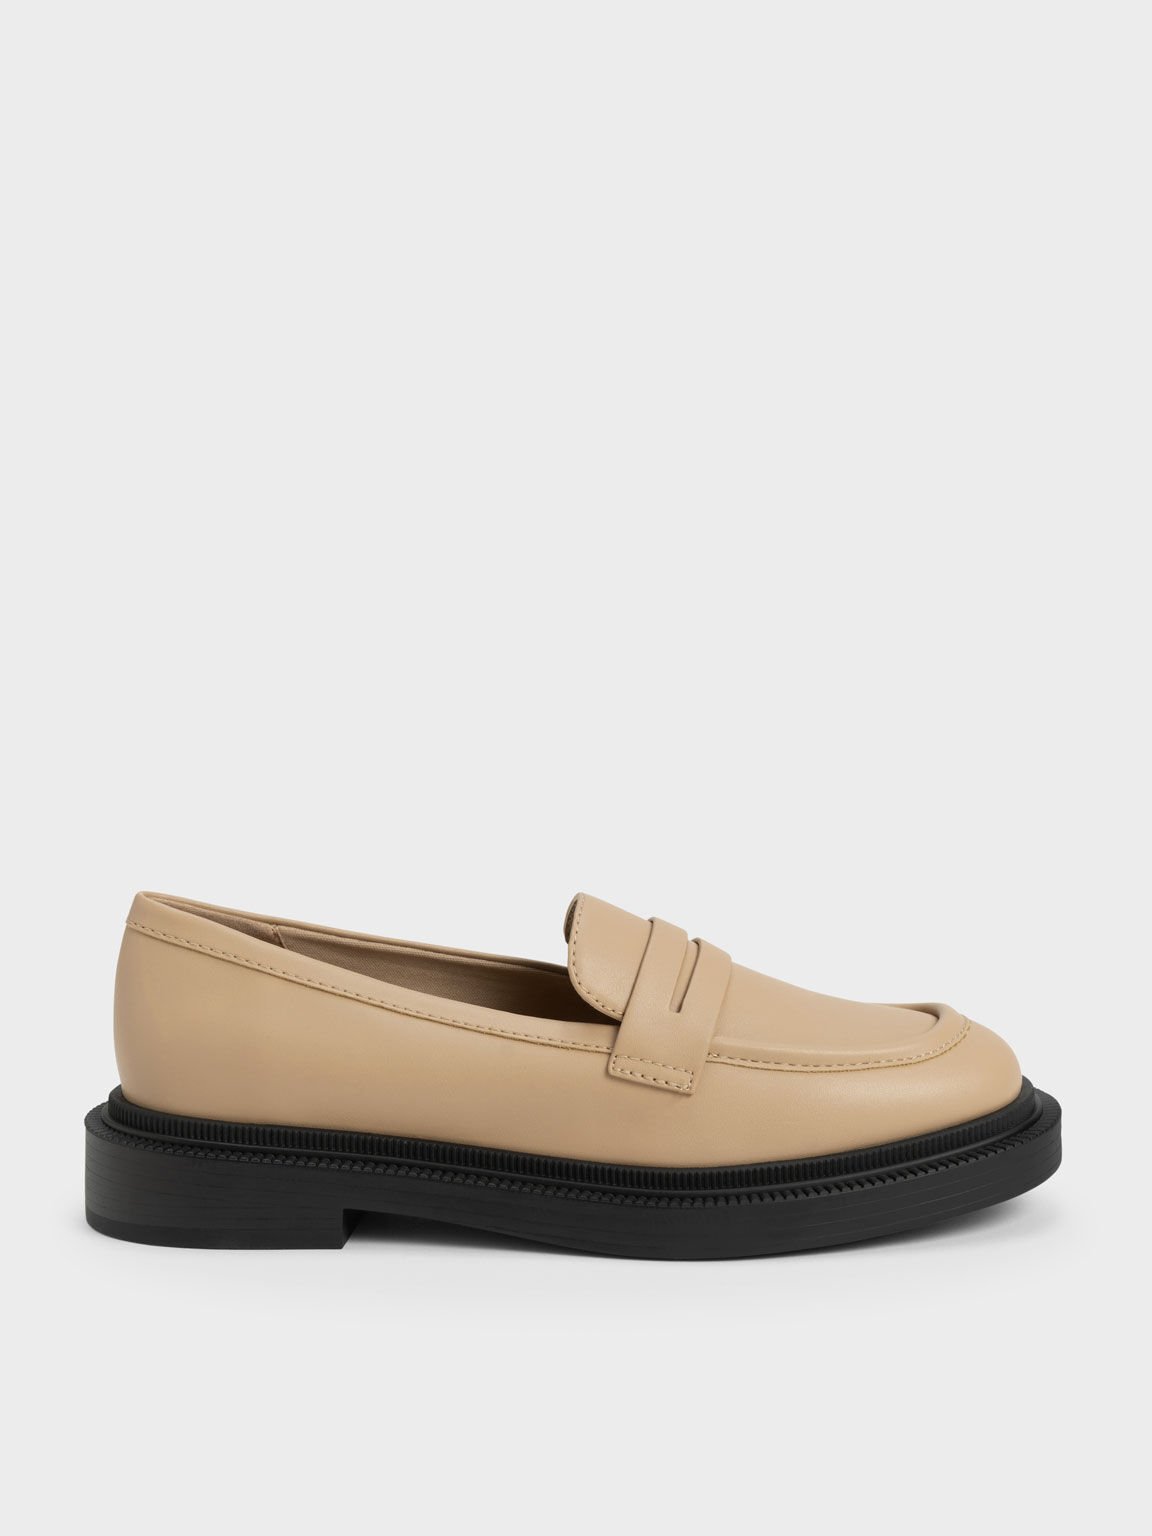 Nude Classic Loafers & KEITH US